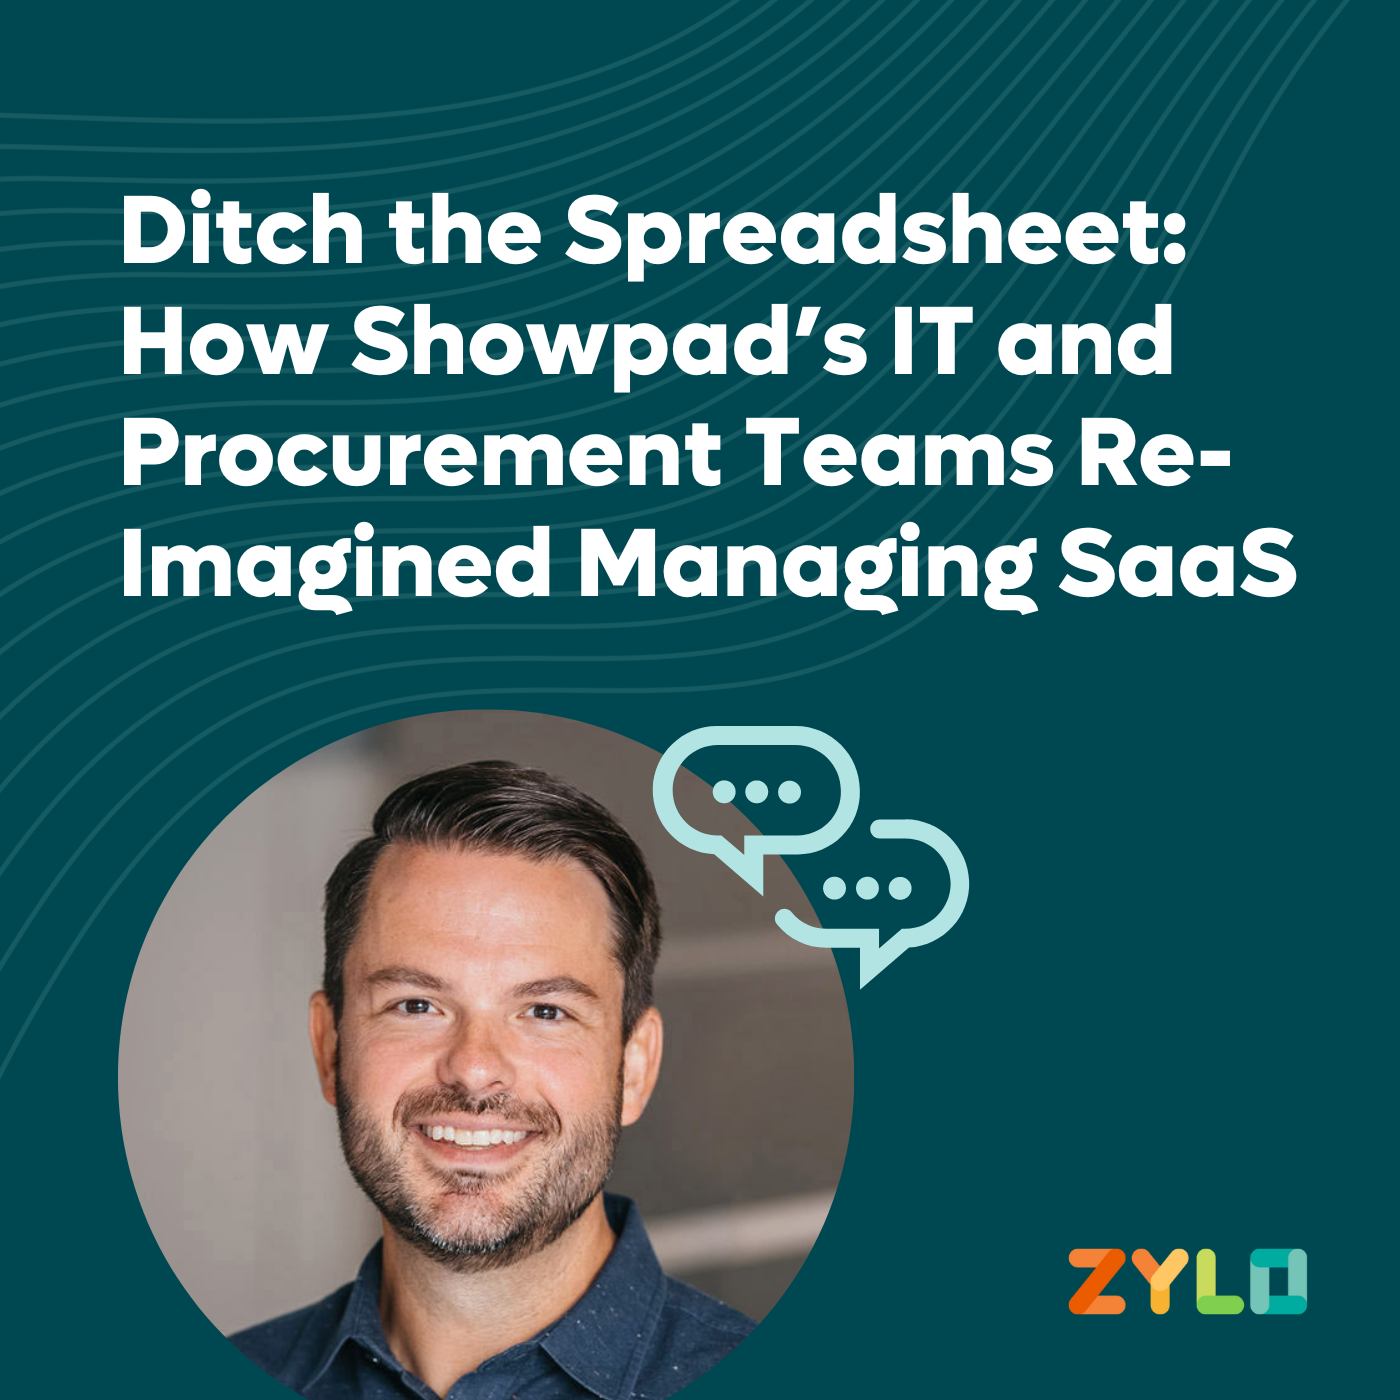 Ditch the Spreadsheet: How Showpad’s IT and Procurement Teams Re-Imagined Managing SaaS